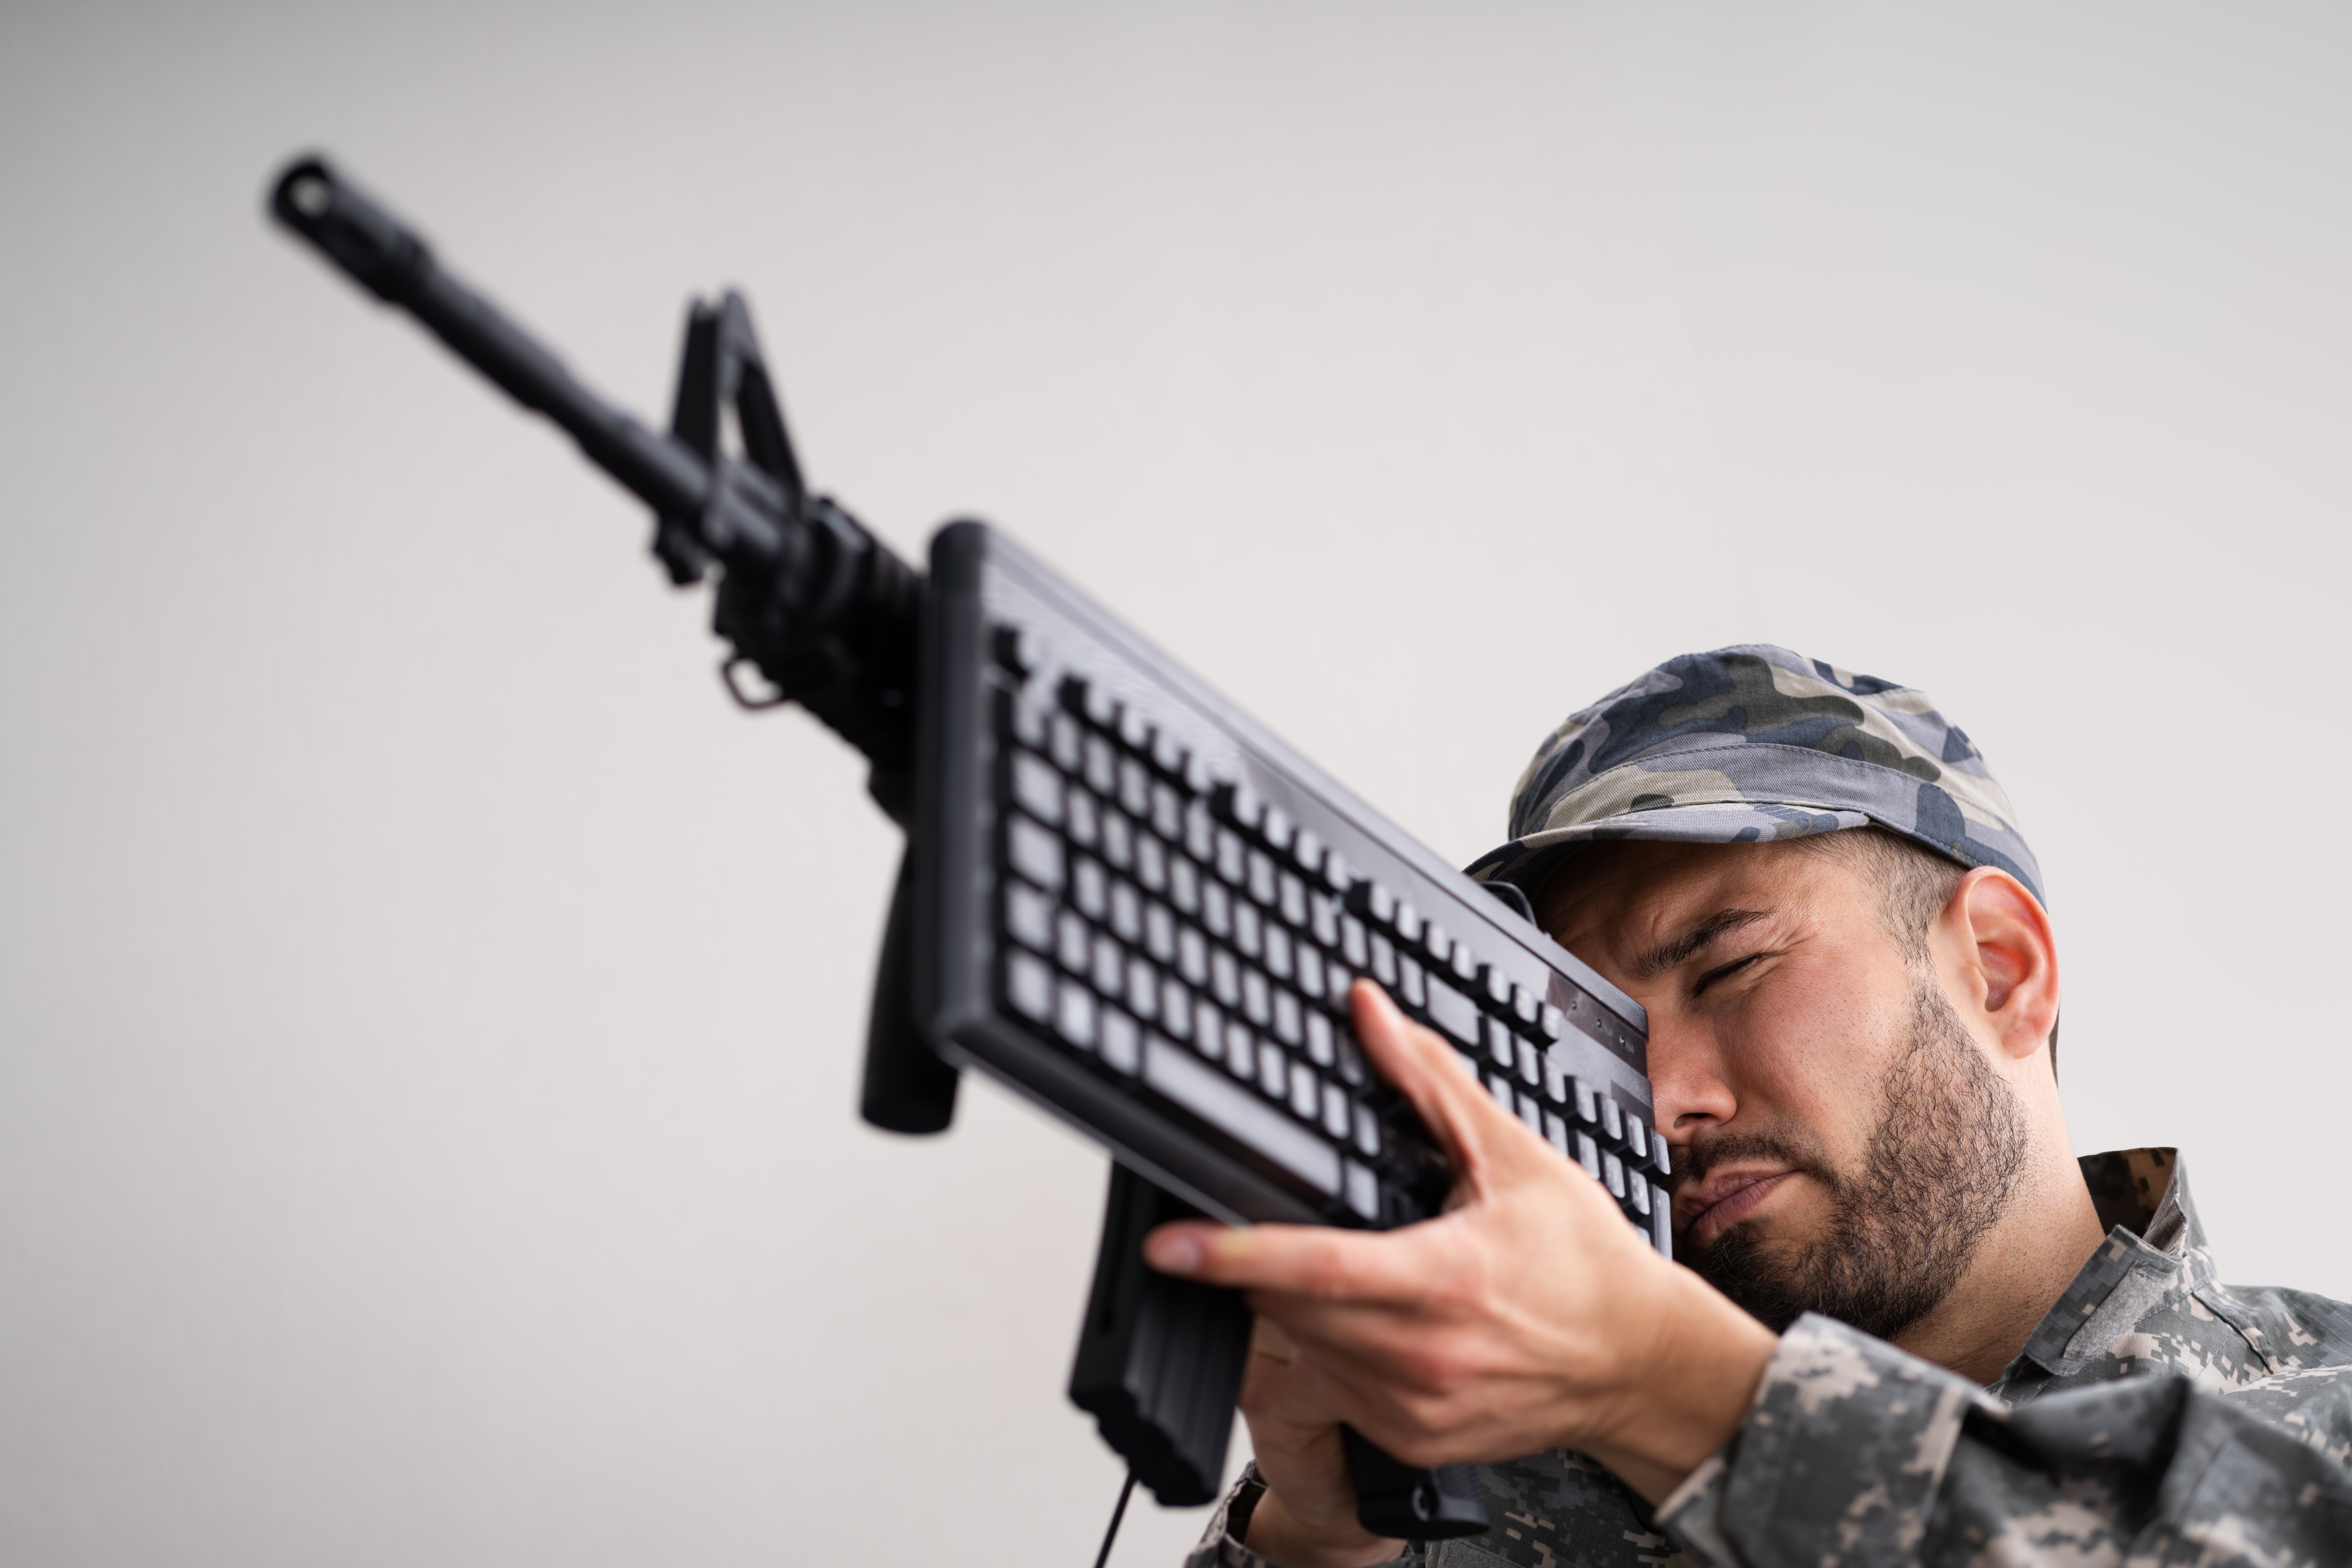 man in military uniform holding up gun with keyboard next to it